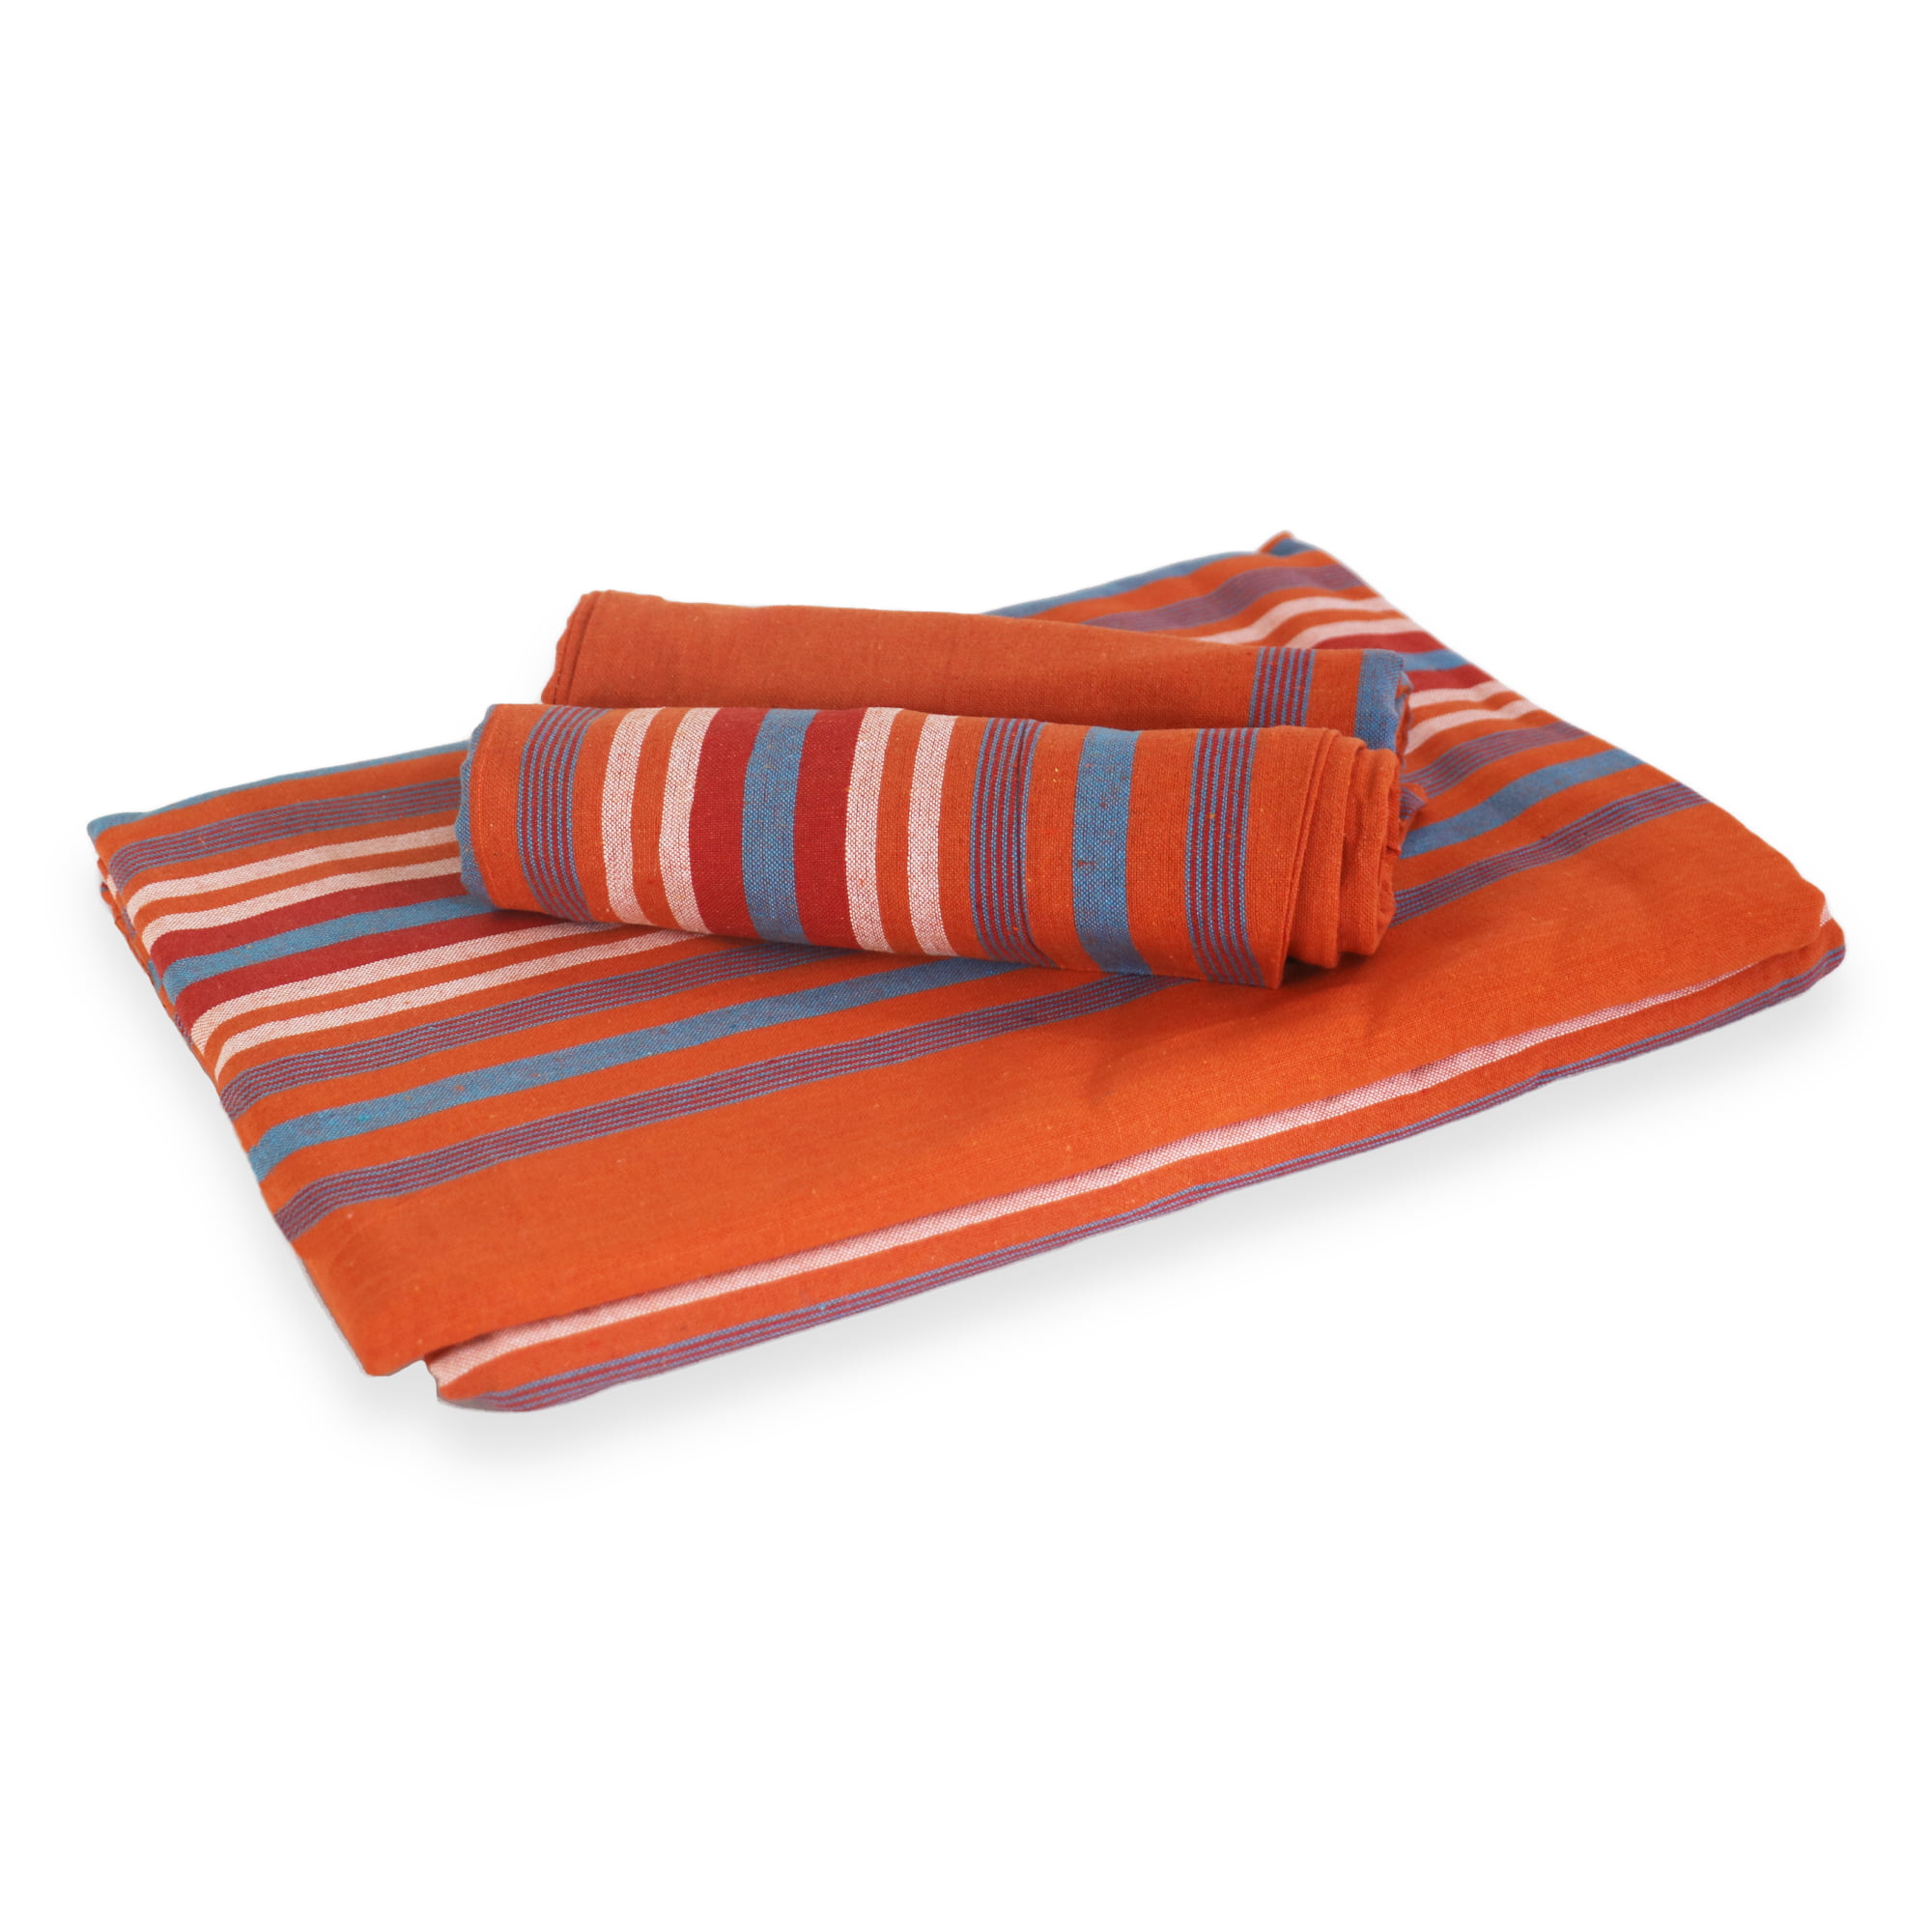 Orange Bed Sheet Set Cotton Handloom 90x90 (Inches) with Two Matching Pillow Covers for King, Queen, Triple, California King Beds